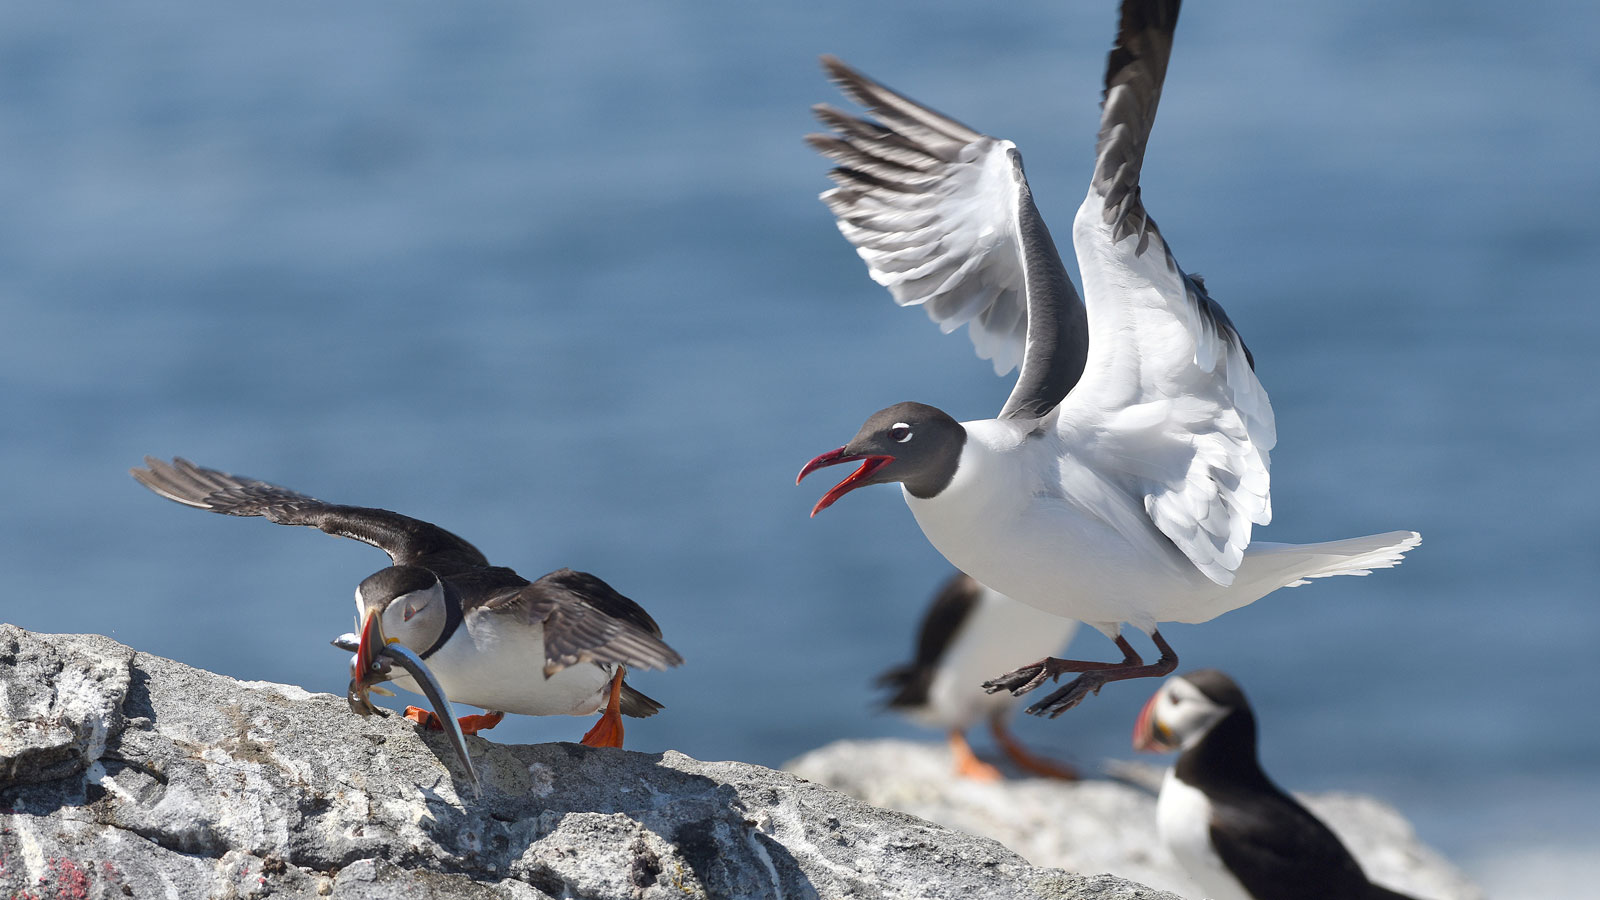 Puffin being harassed by a gull